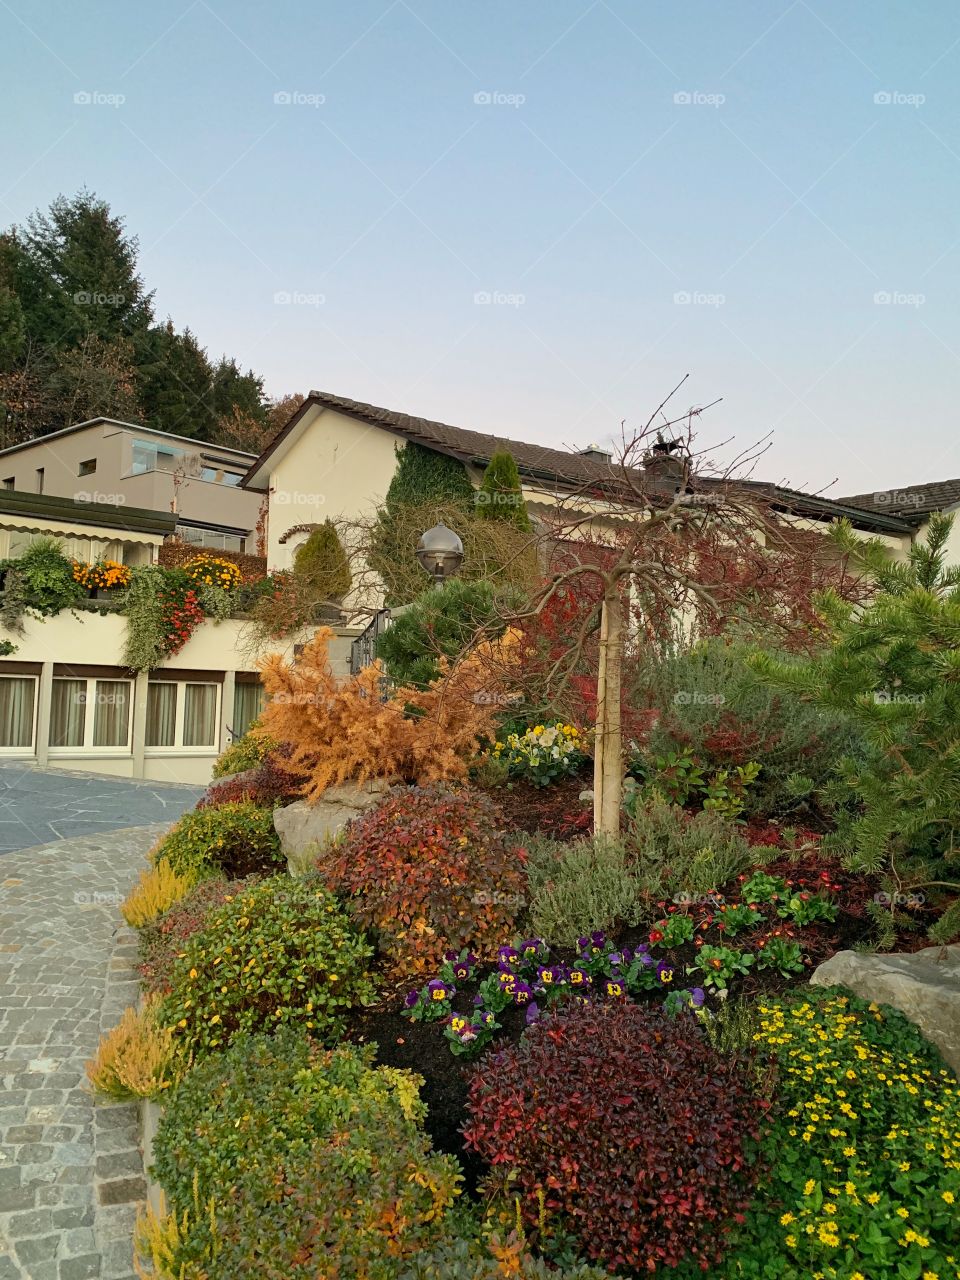 Plants and house in Switzerland 